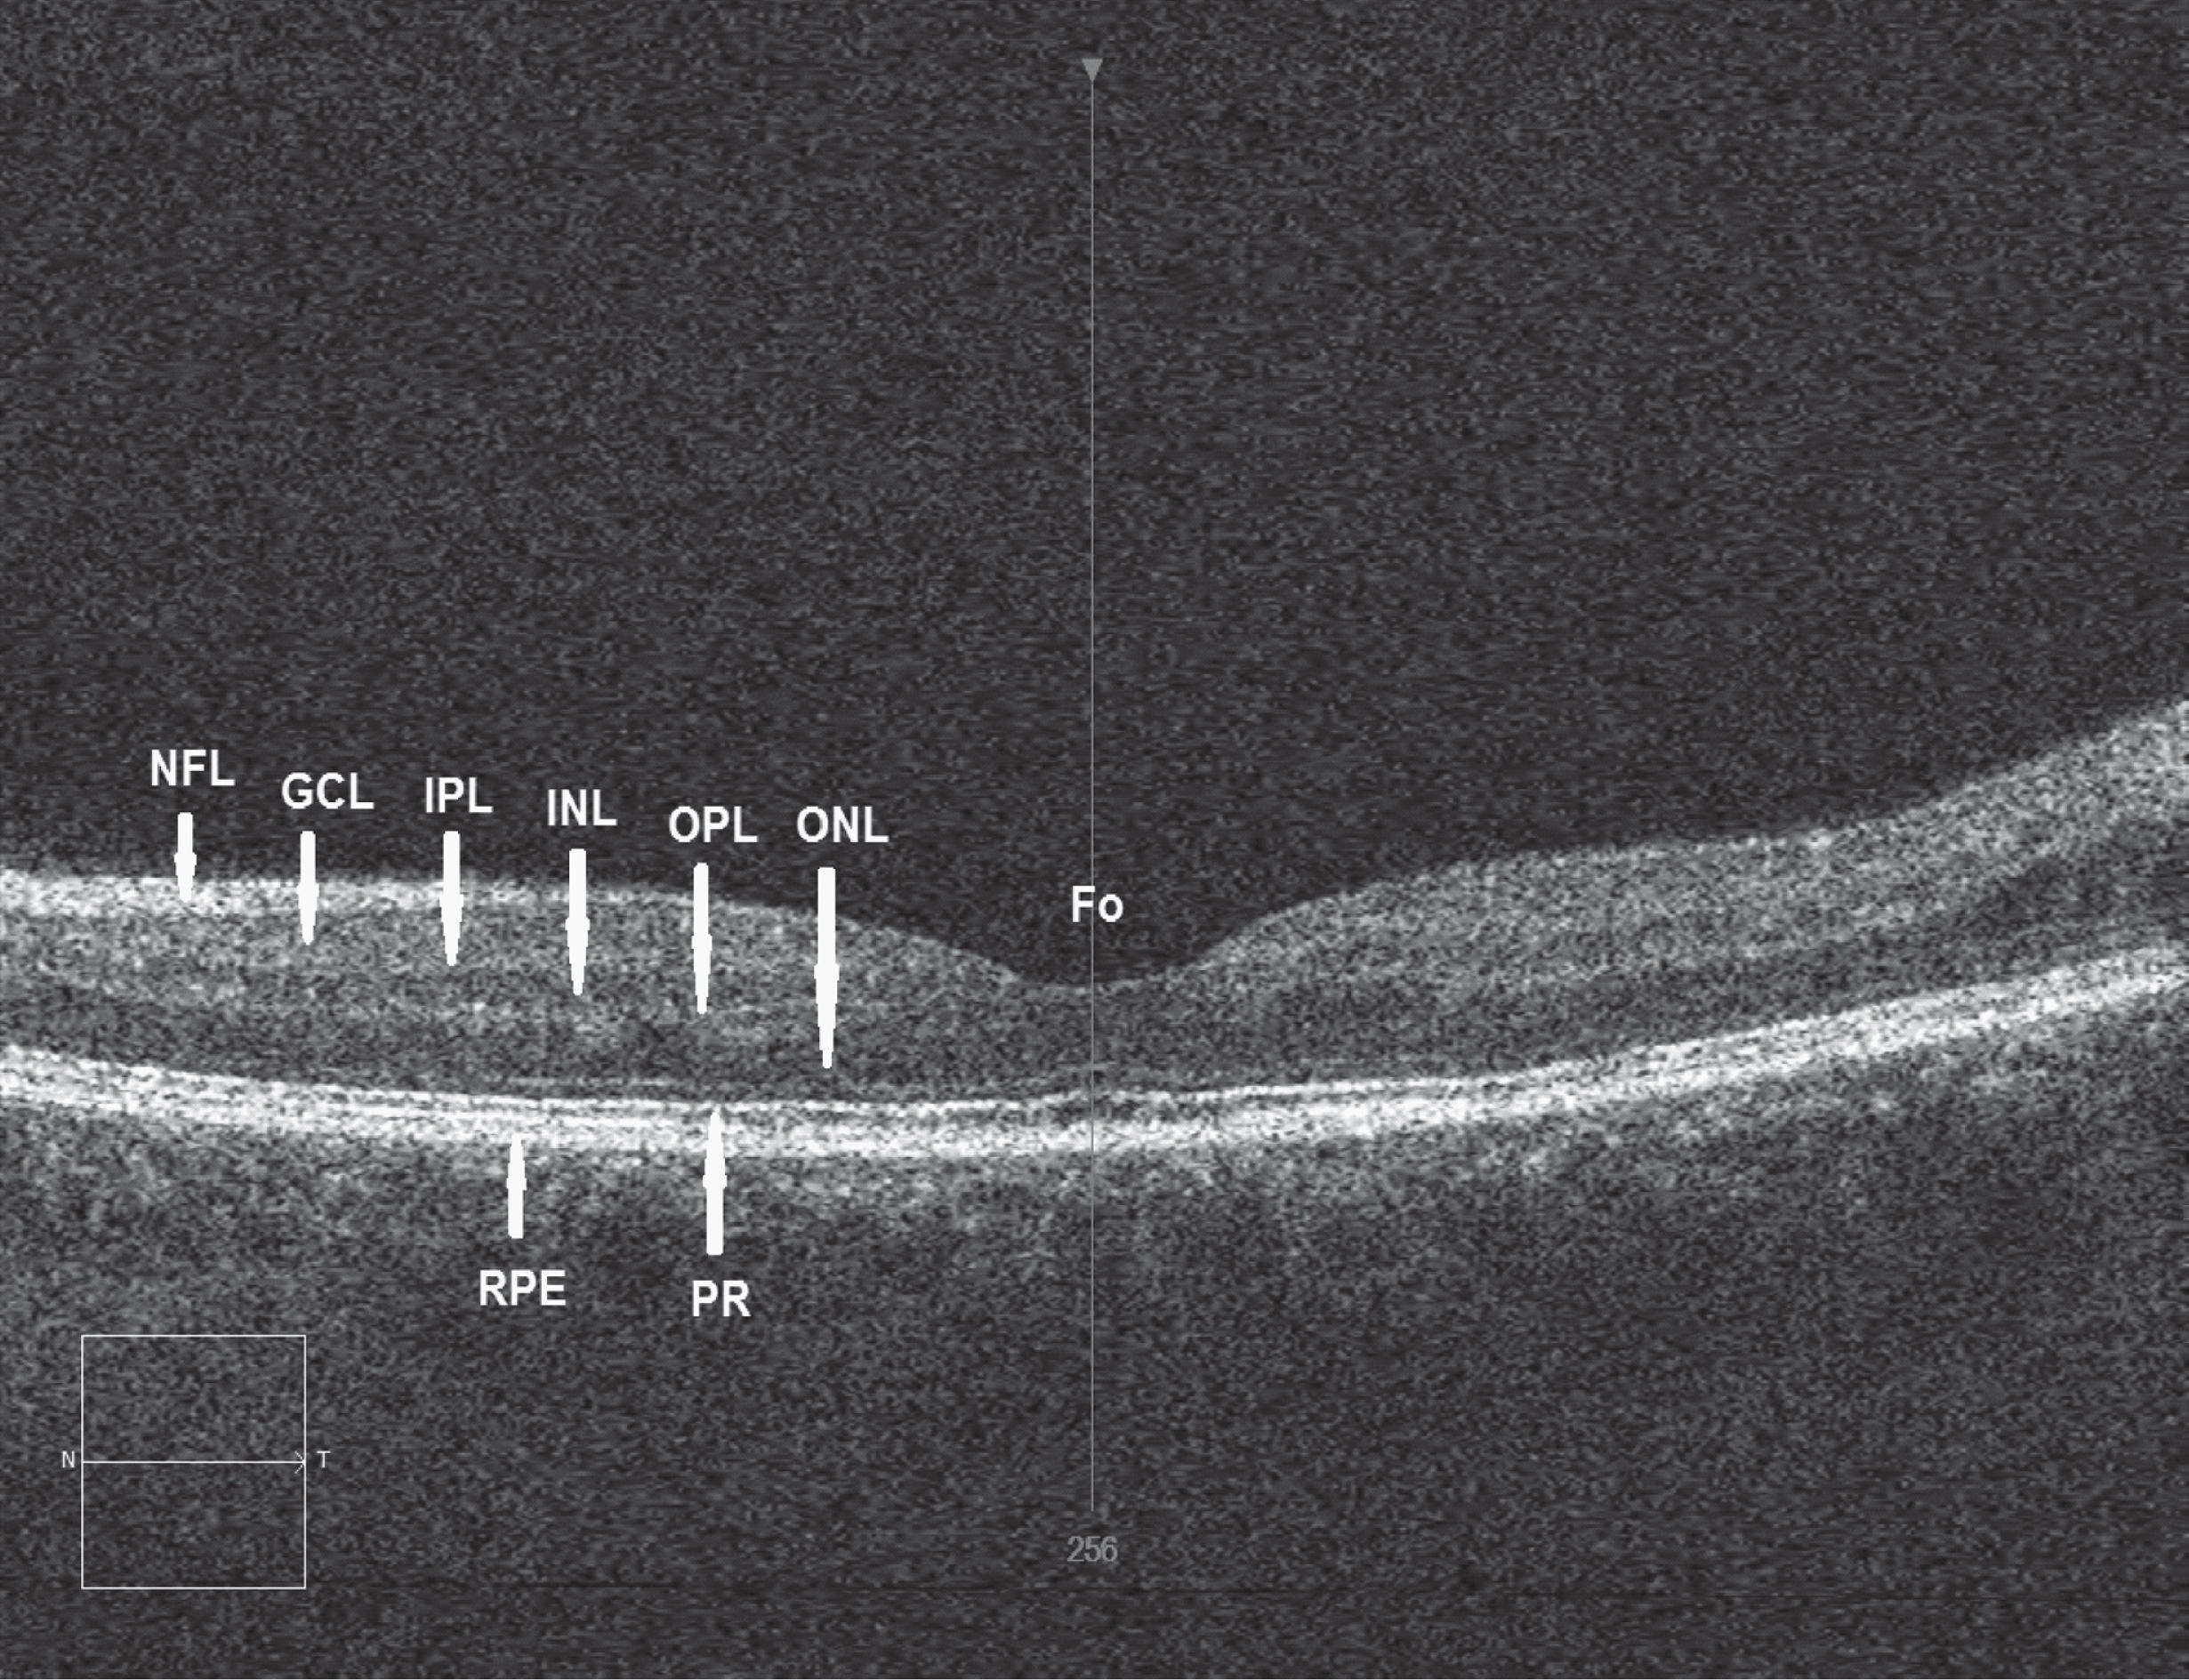 Retinal image of a normal control subject using optical coherence tomography (OCT) showing the various functional layers: Fo = Location of fovea, NFL = Nerve fibre layer, GCL = Ganglion cell layer, IPL = Inner plexiform layer, INL = Inner nuclear layer, OPL = Outer plexiform layer, ONL = Outer nuclear layer, RPE = Retinal pigment epithelium, PR = Photoreceptor layer, N = Nasal direction, T = Temporal direction. A specific thinning of INL in the parafoveal region has been recorded in Parkinson’s disease (PD). (Image courtesy Dr R Heitmar, Aston University)